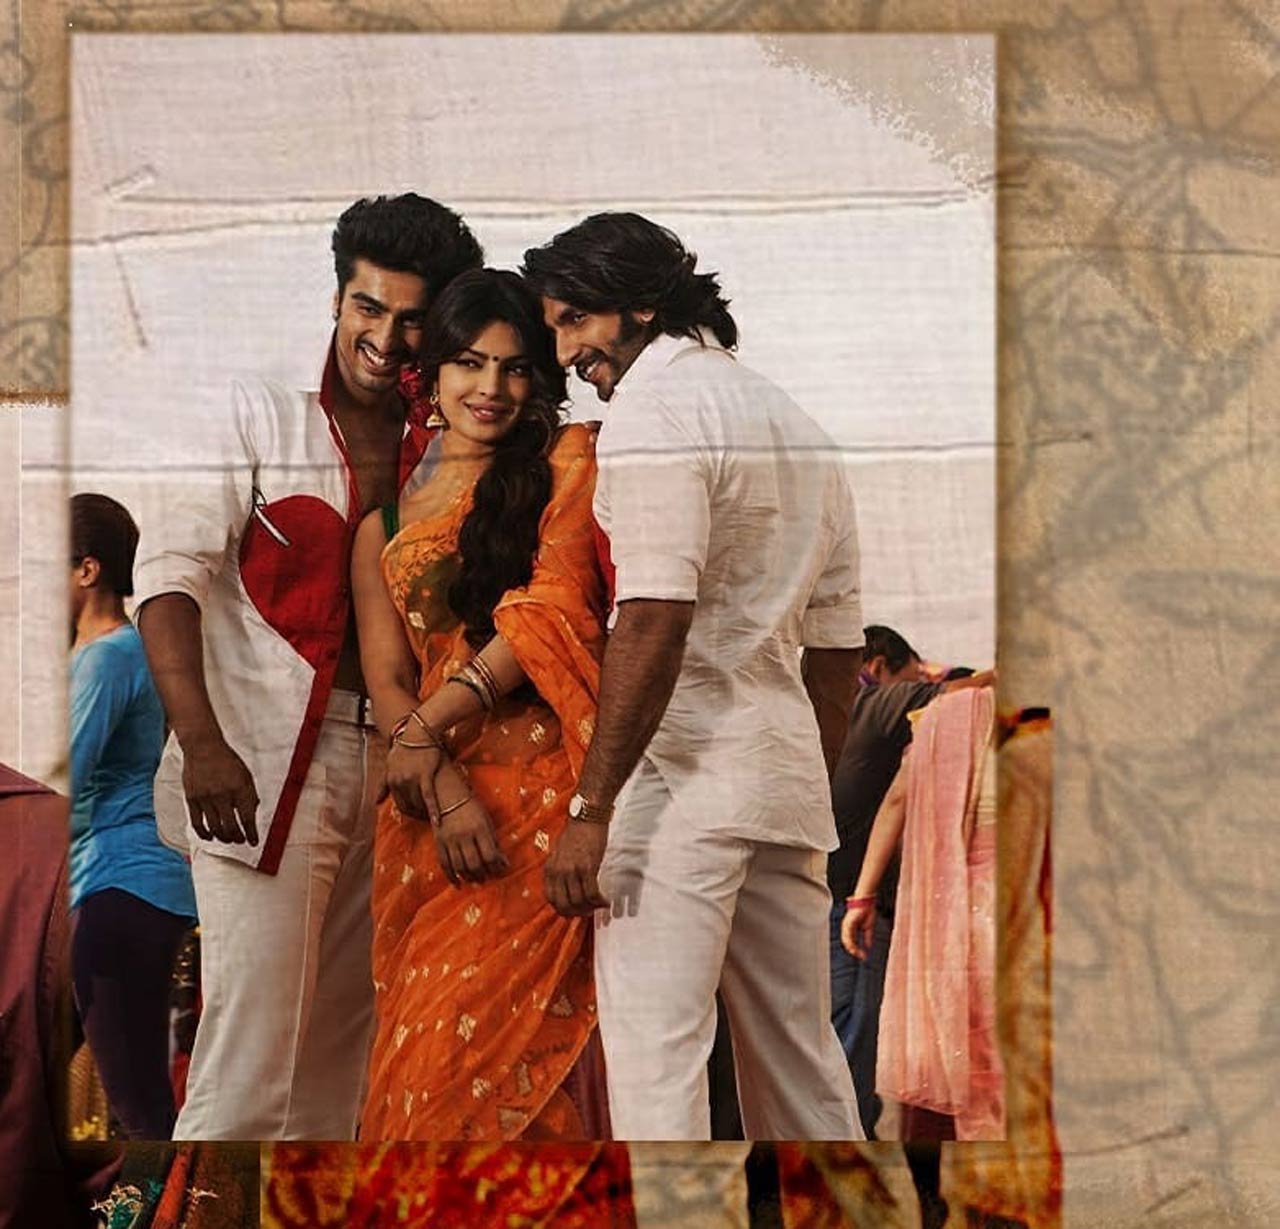 Gunday (2014)
For all the flashy machismo that occupied most of its screen time, Ali Abbas Zafar's directorial got one thing right, the entry of its heroes. Two kids atop a speeding train grow up as Ranveer Singh and Arjun Kapoor right in the next shot, with the camera moving from their legs to their faces and chests. They run towards the camera in slow motion and crack a whacky, narcissistic smile as if enjoying the fact they have grown up and been introduced to the globe. This ode to the 70s gave a nostalgic rush only at this particular moment.